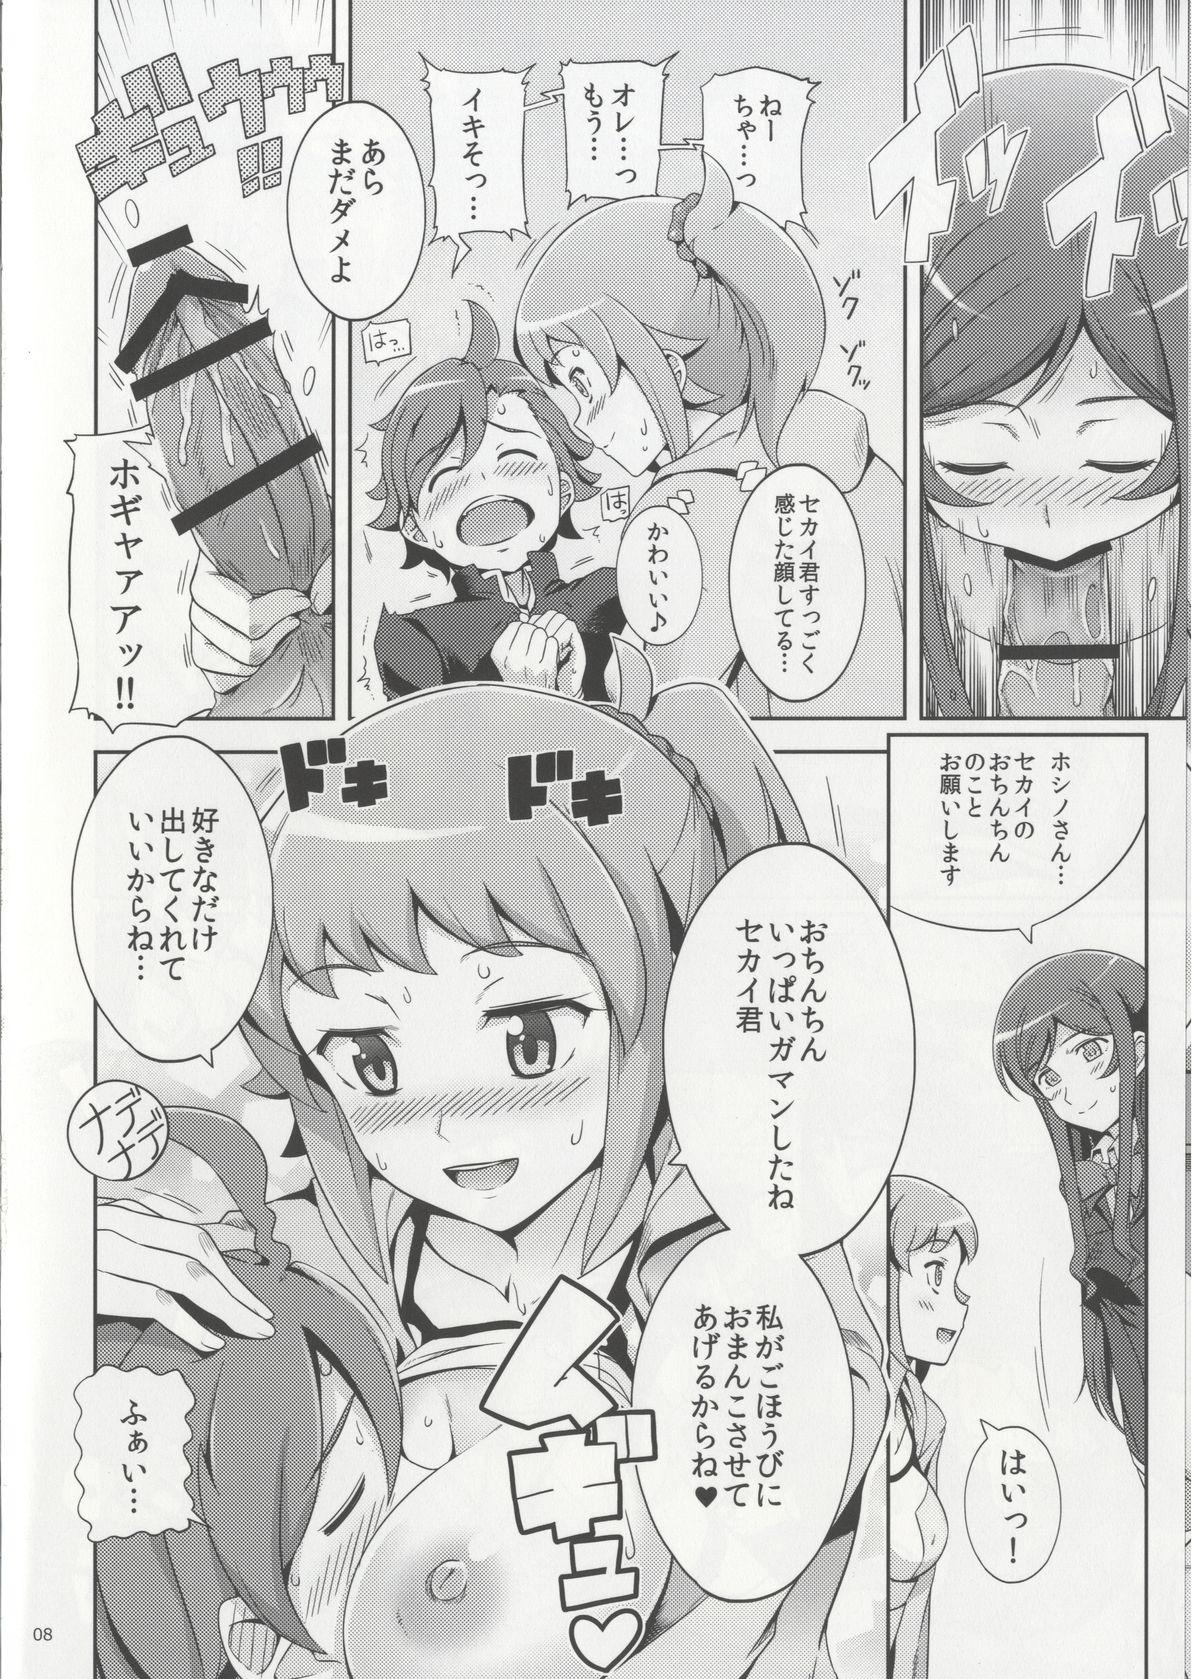 Suck Cock Namahame Try! - Gundam build fighters try Milf Cougar - Page 8